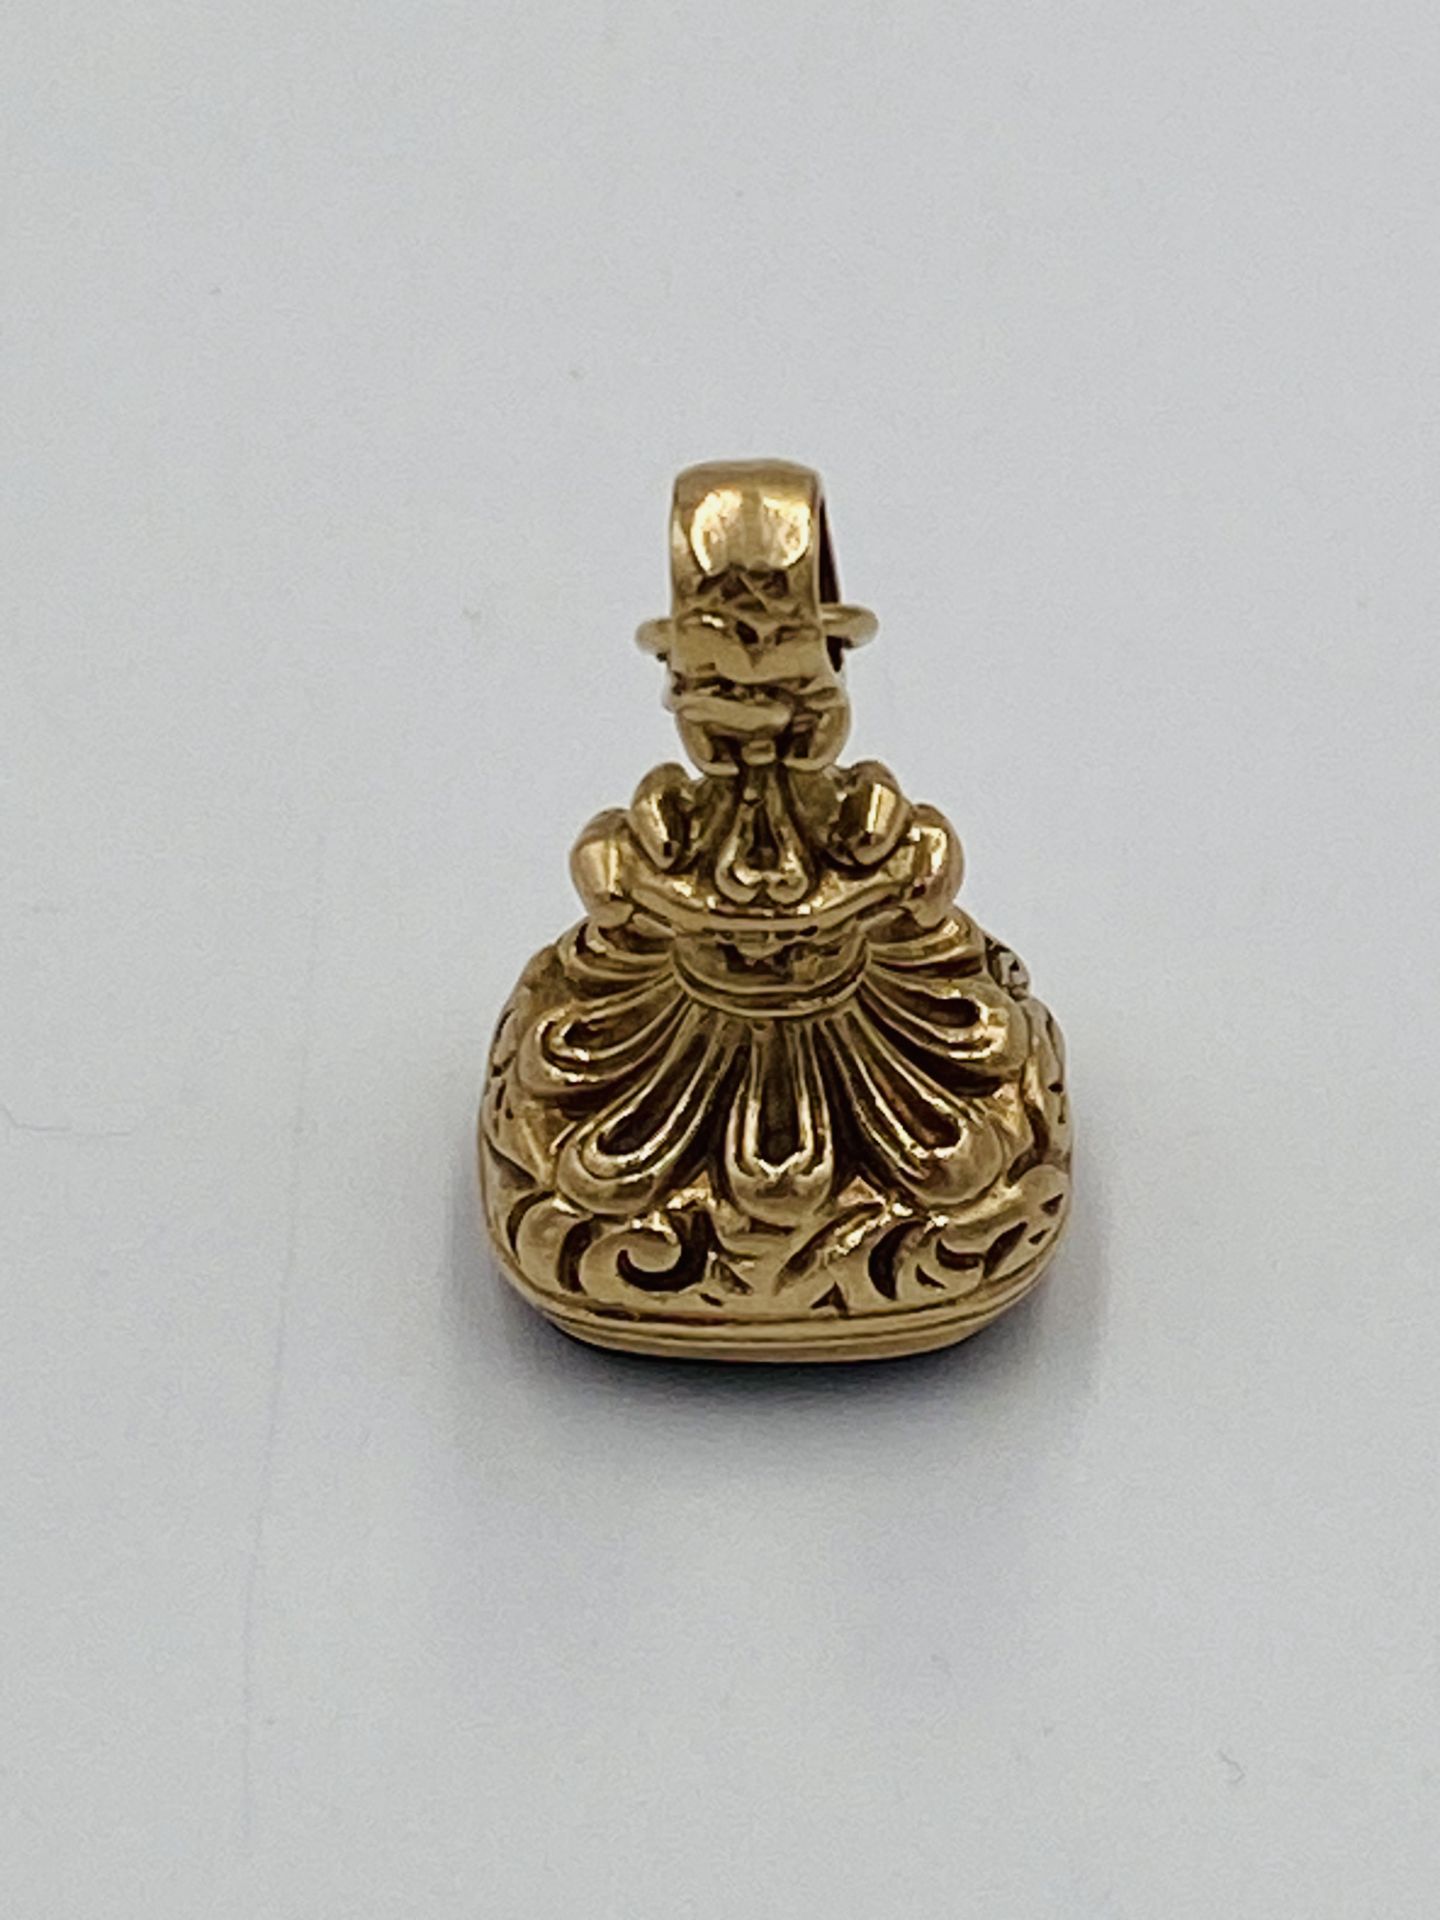 9ct gold fob seal - Image 4 of 5